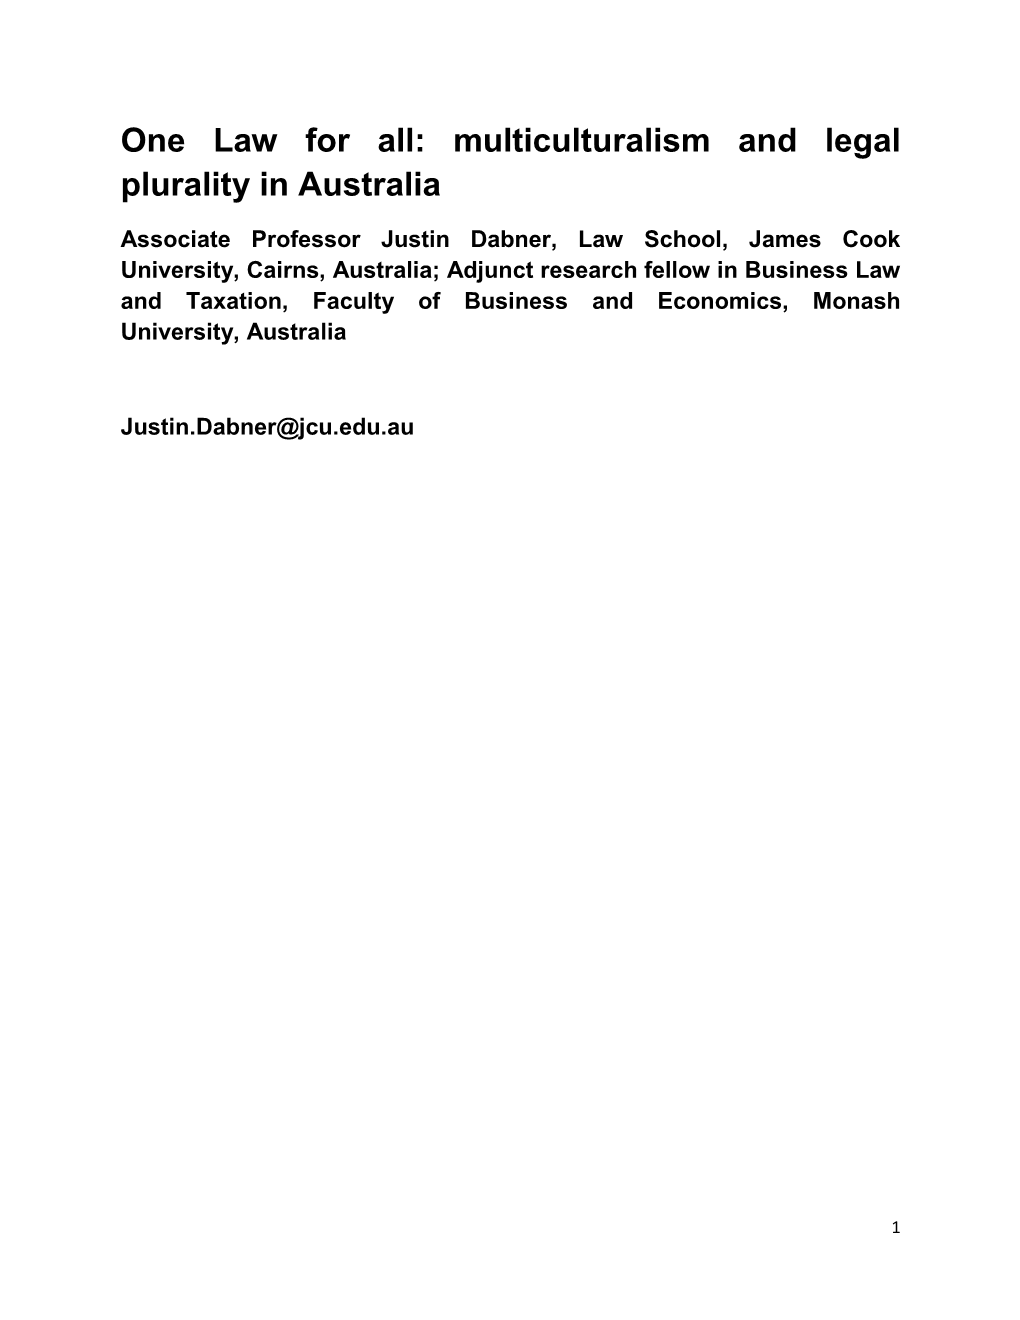 One Law for All: Multiculturalism and Legal Plurality in Australia